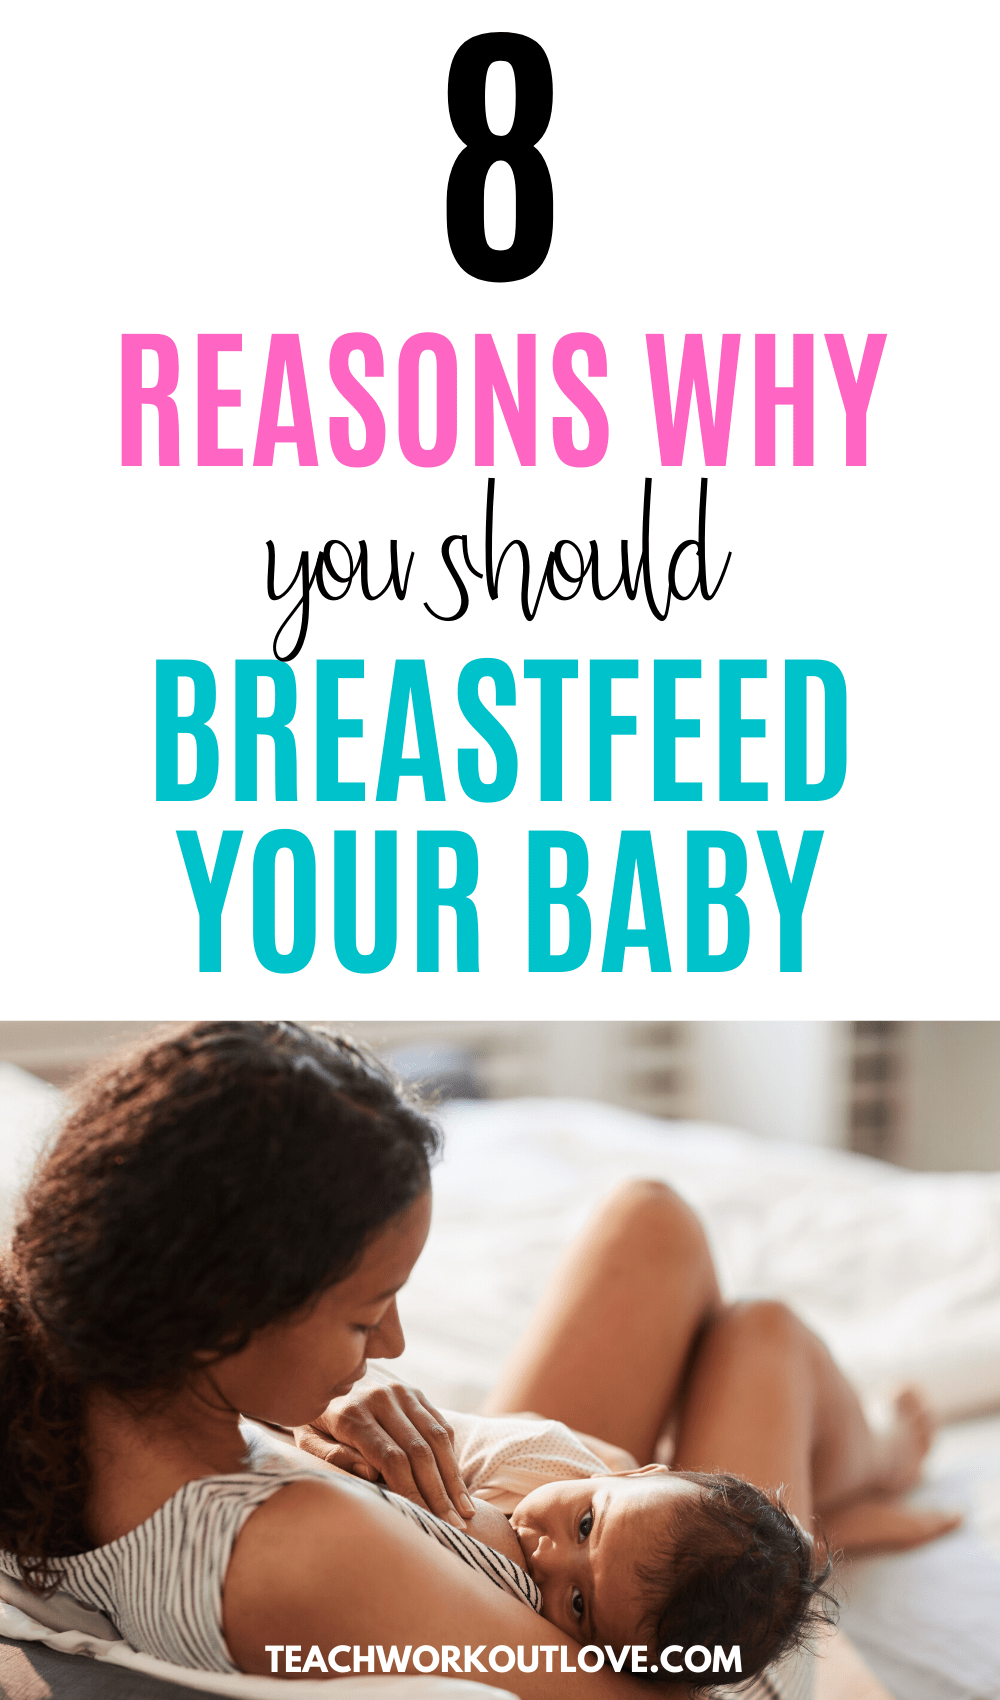 Are you unsure if you want to breastfeed? Here are 8 good reasons to breastfeed your baby! Happiness and better sleep are only two of them.